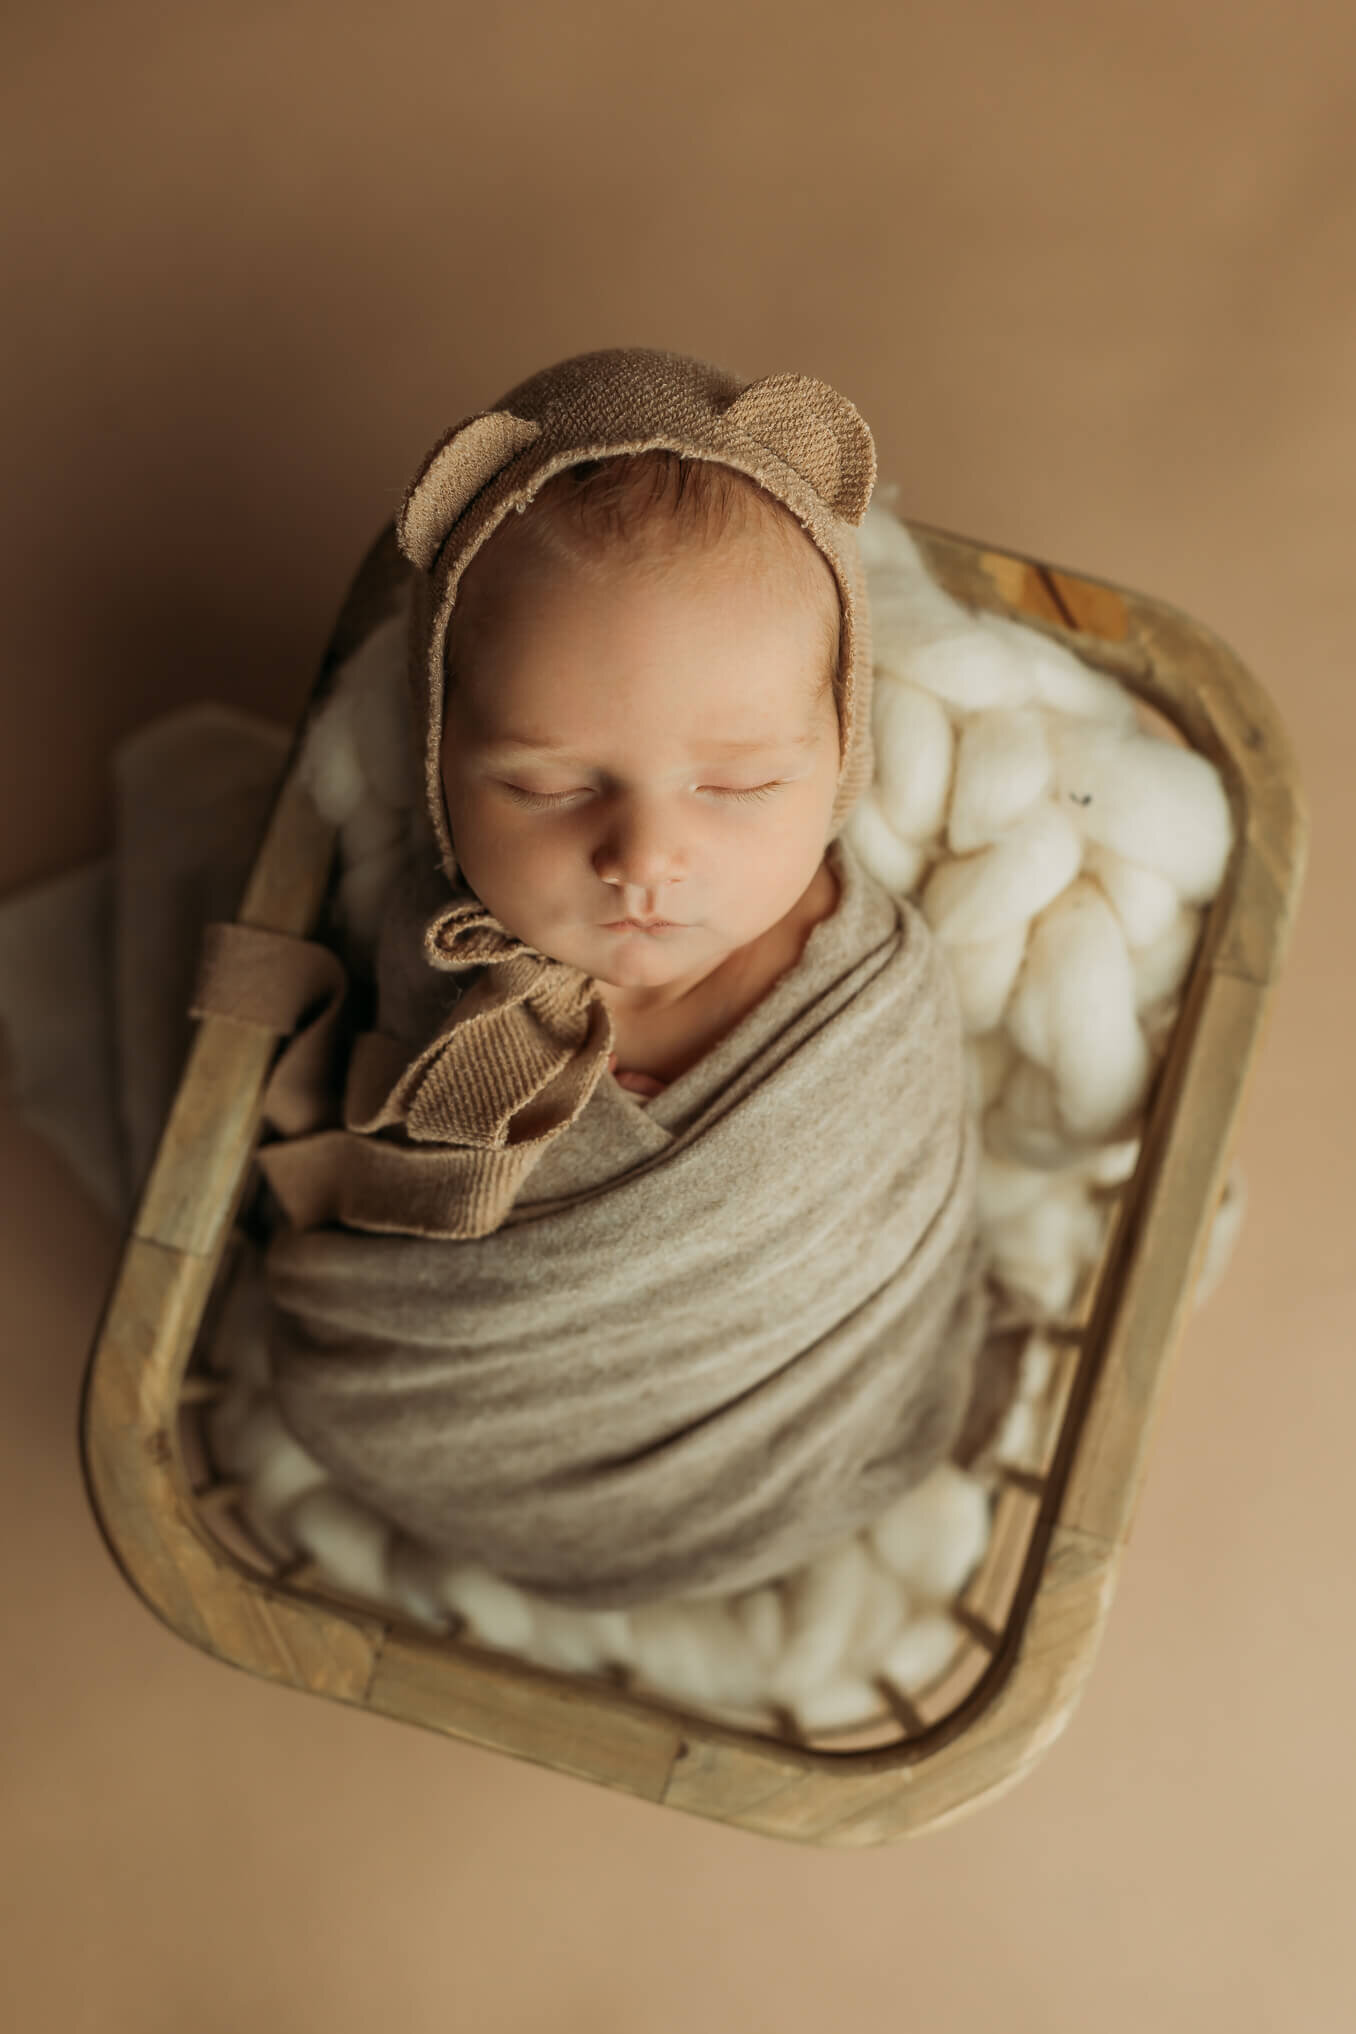 Newborn boy in a bear bonnet wrapped in a swaddle sleeping in a basket on a brown background